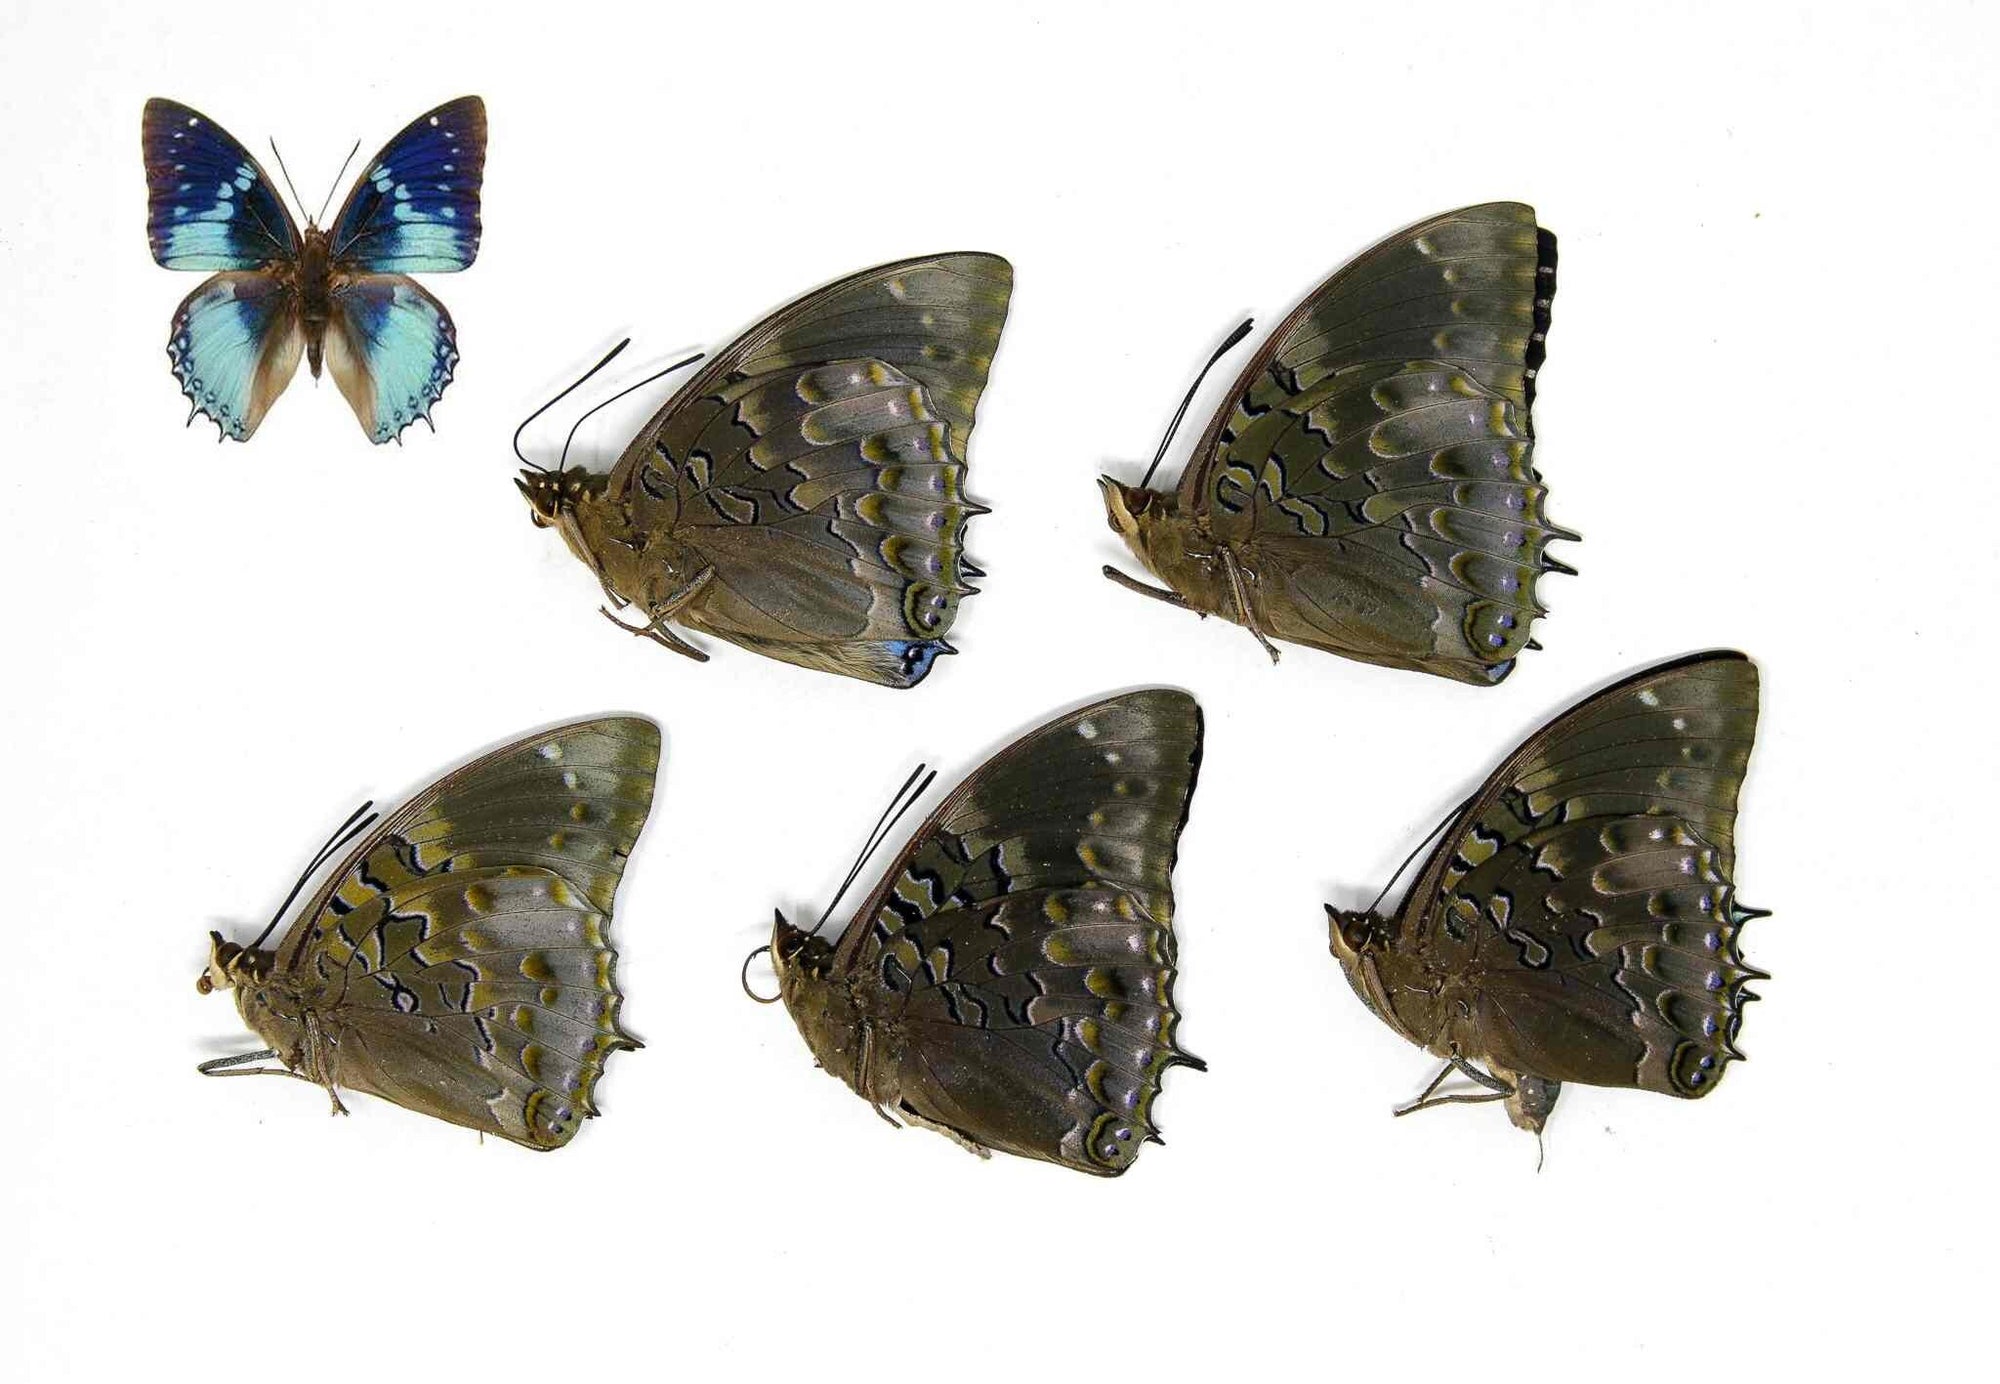 Five (5) Western Blue Charaxes | Charaxes smaragdalis | Unmounted Papered Butterflies | Entomology Specimens A1